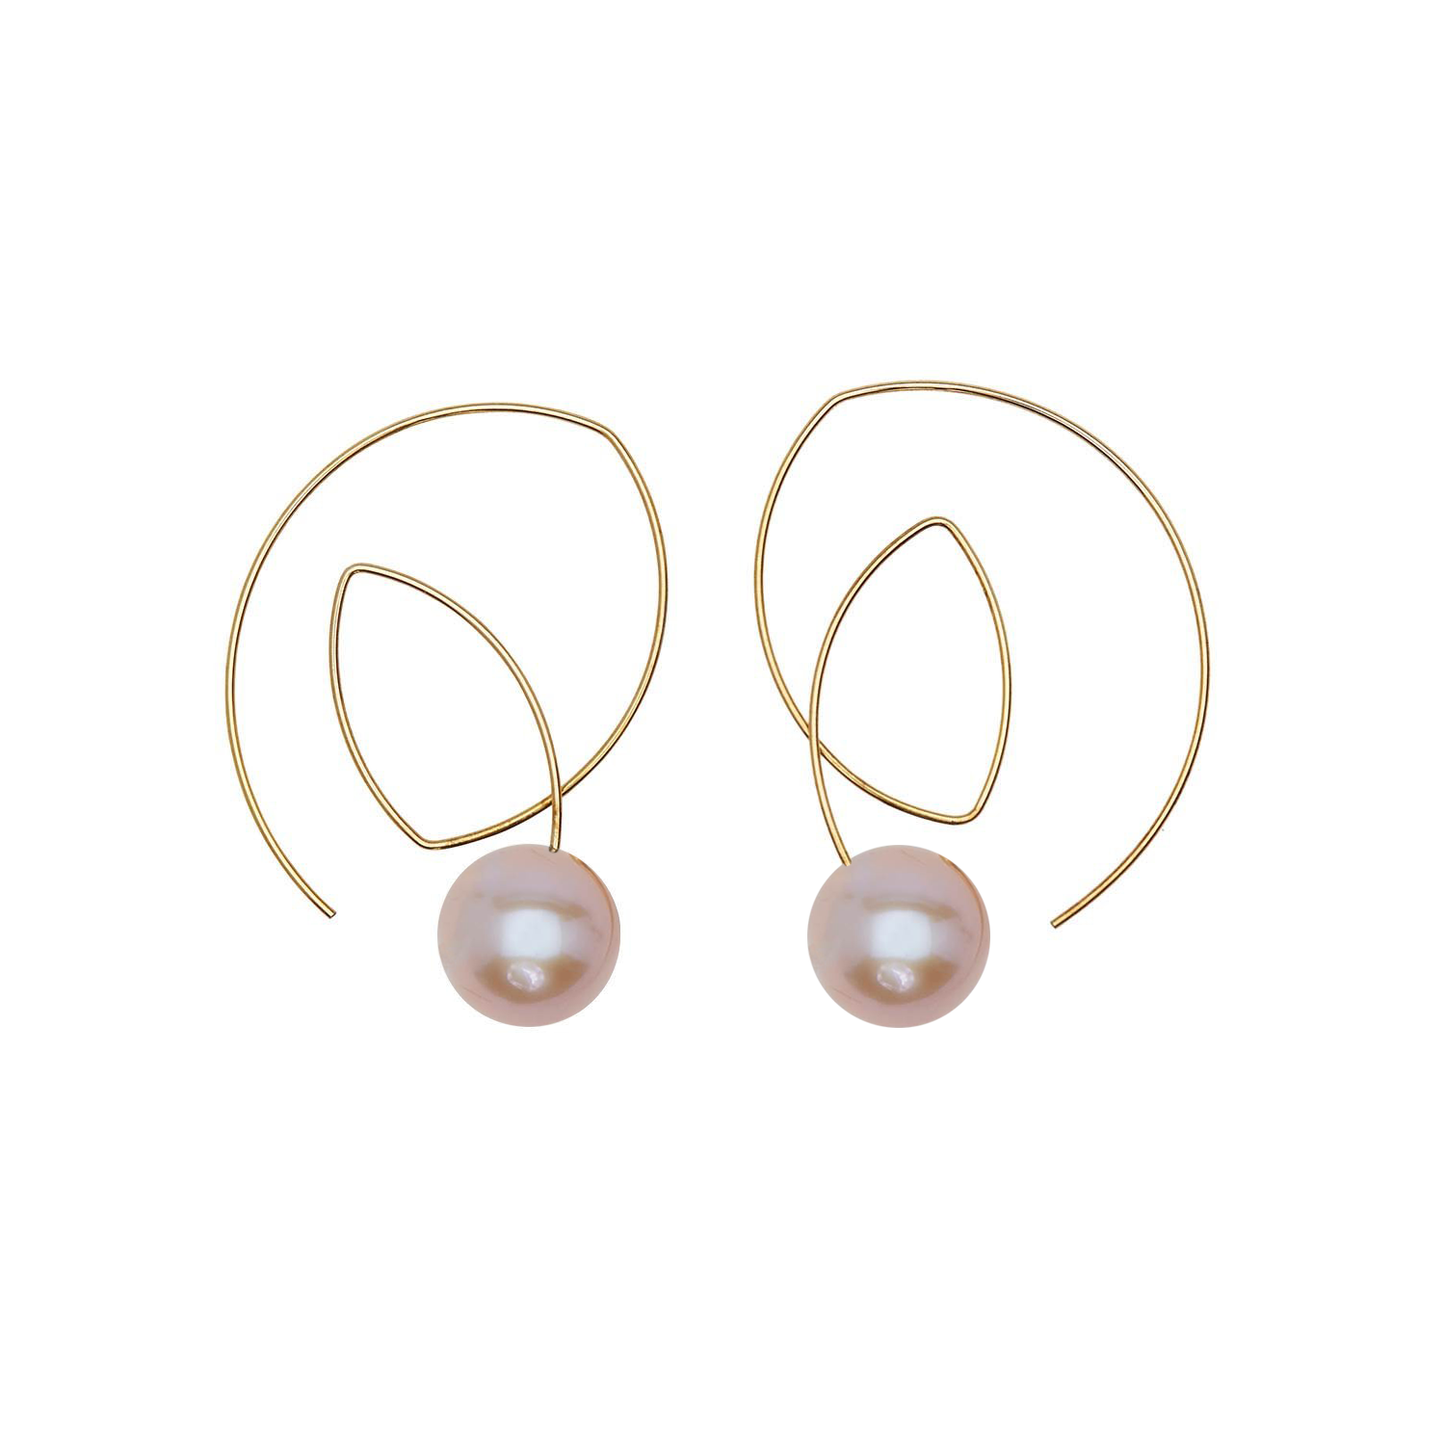 Angled Loop Earrings with Round Freshwater Pearls